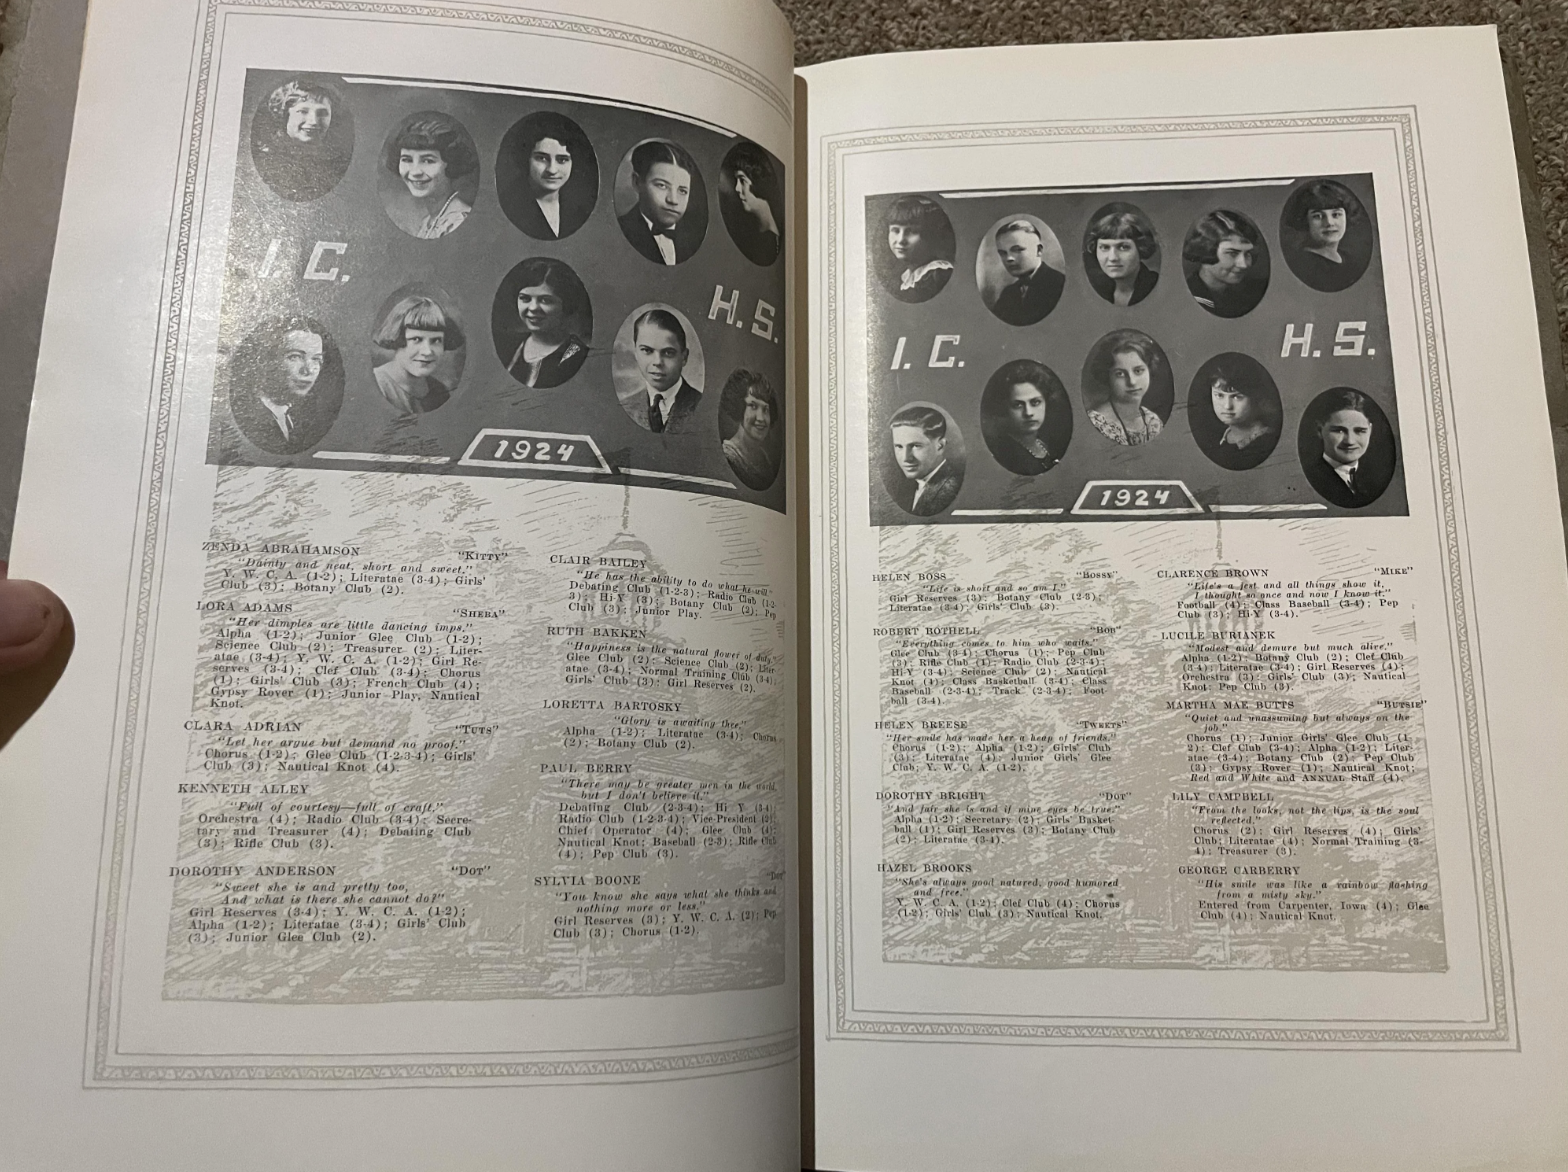 Open high school yearbook with photos of young men and women, signatures and messages, and typewritten names